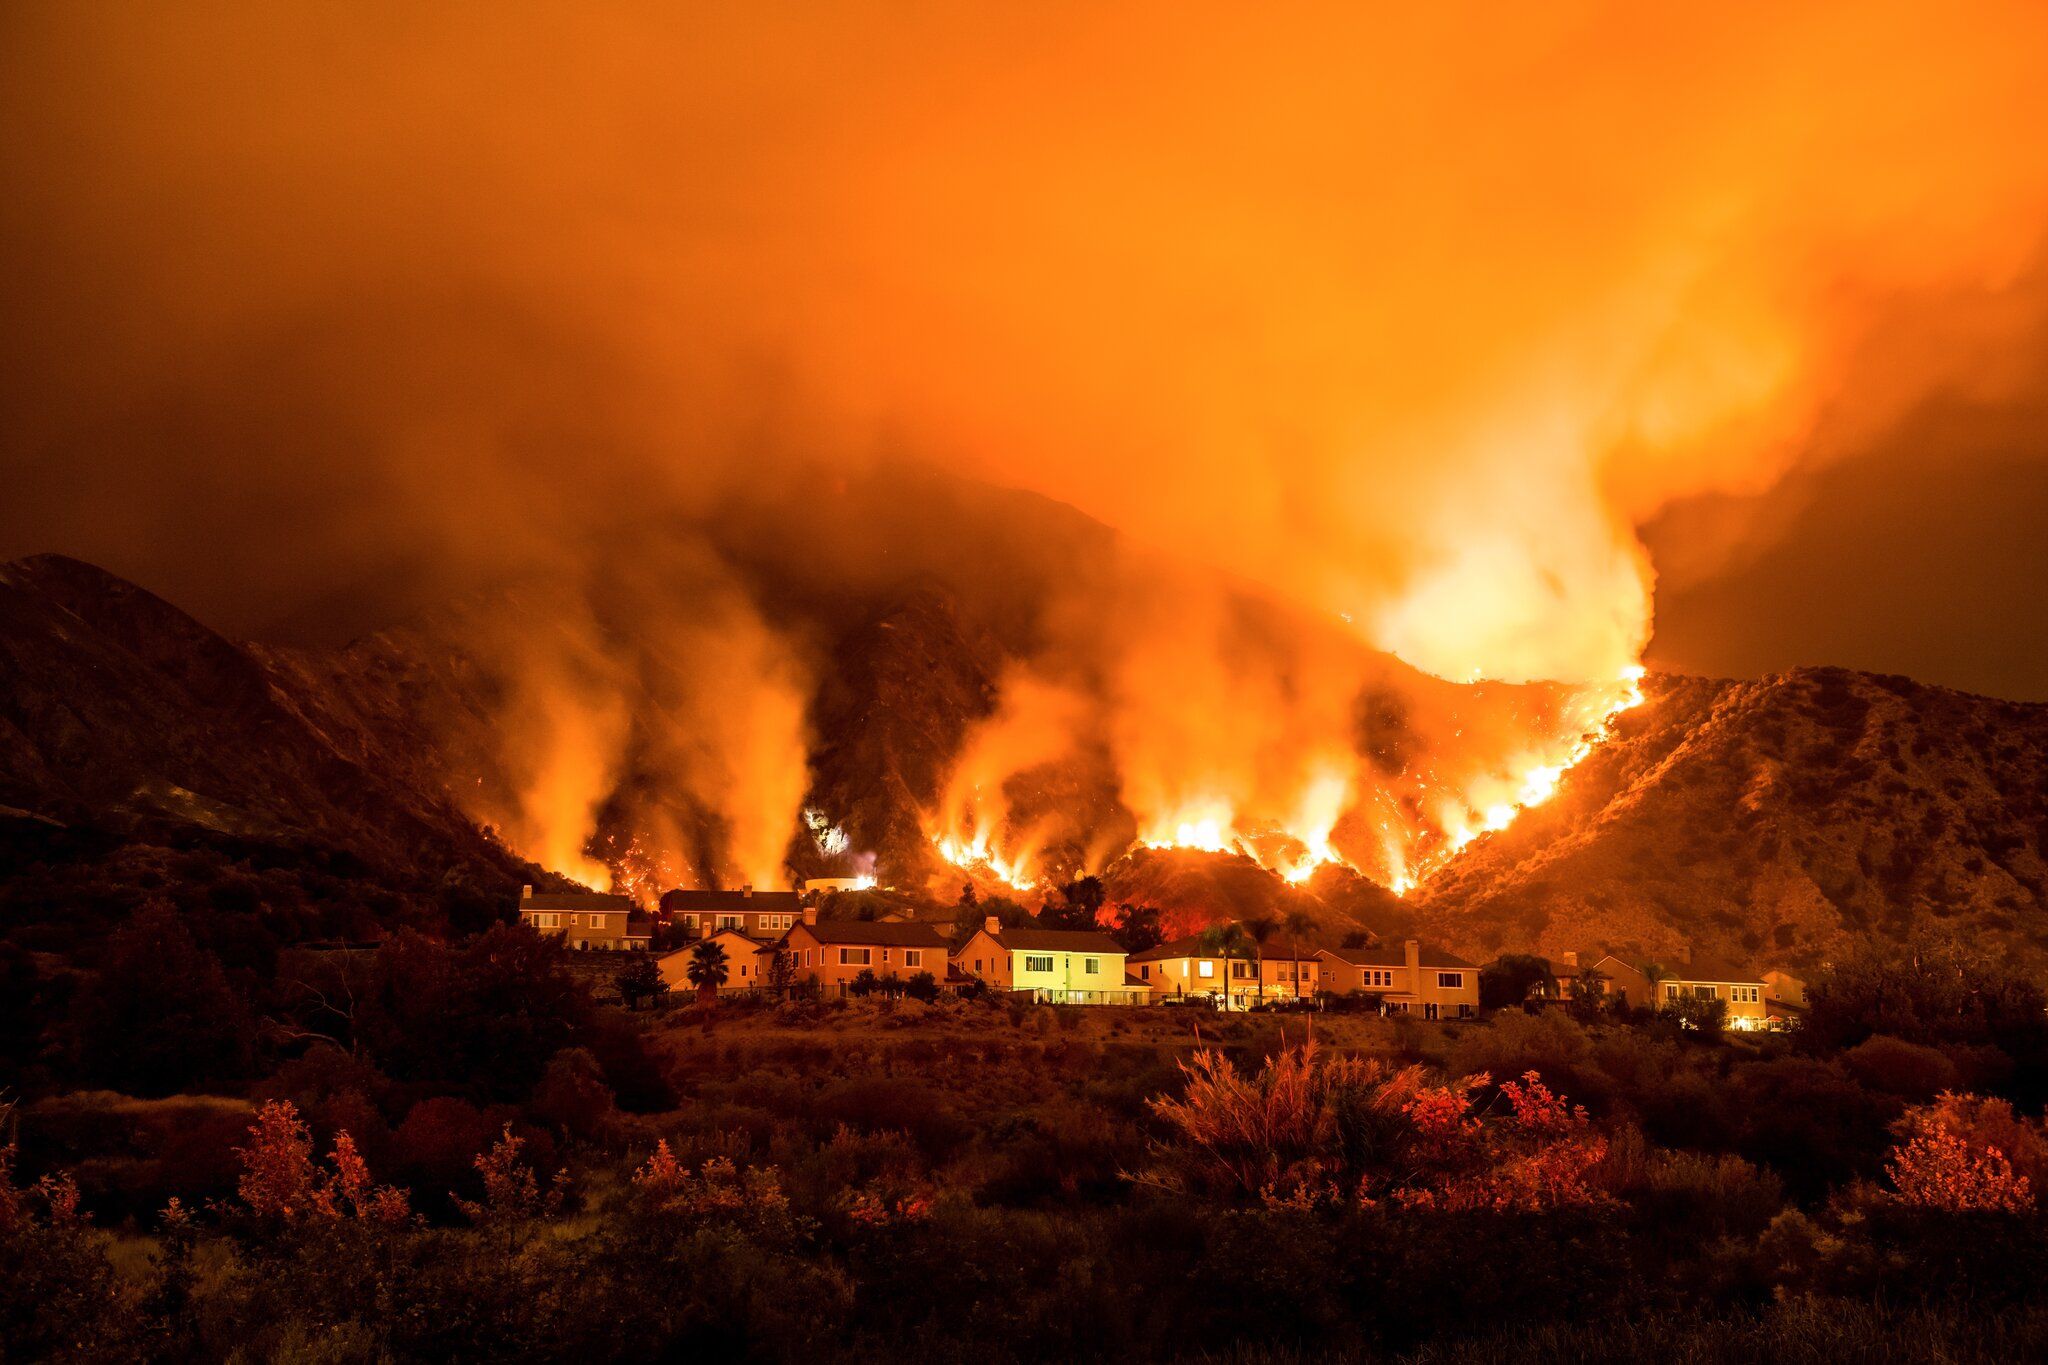 The Ranch 2 Fire in Azusa, California, burned more than 4,200 acres, part of the worst wildfire season in the state's history. Image by Meridith Kohut. United States, 2020.